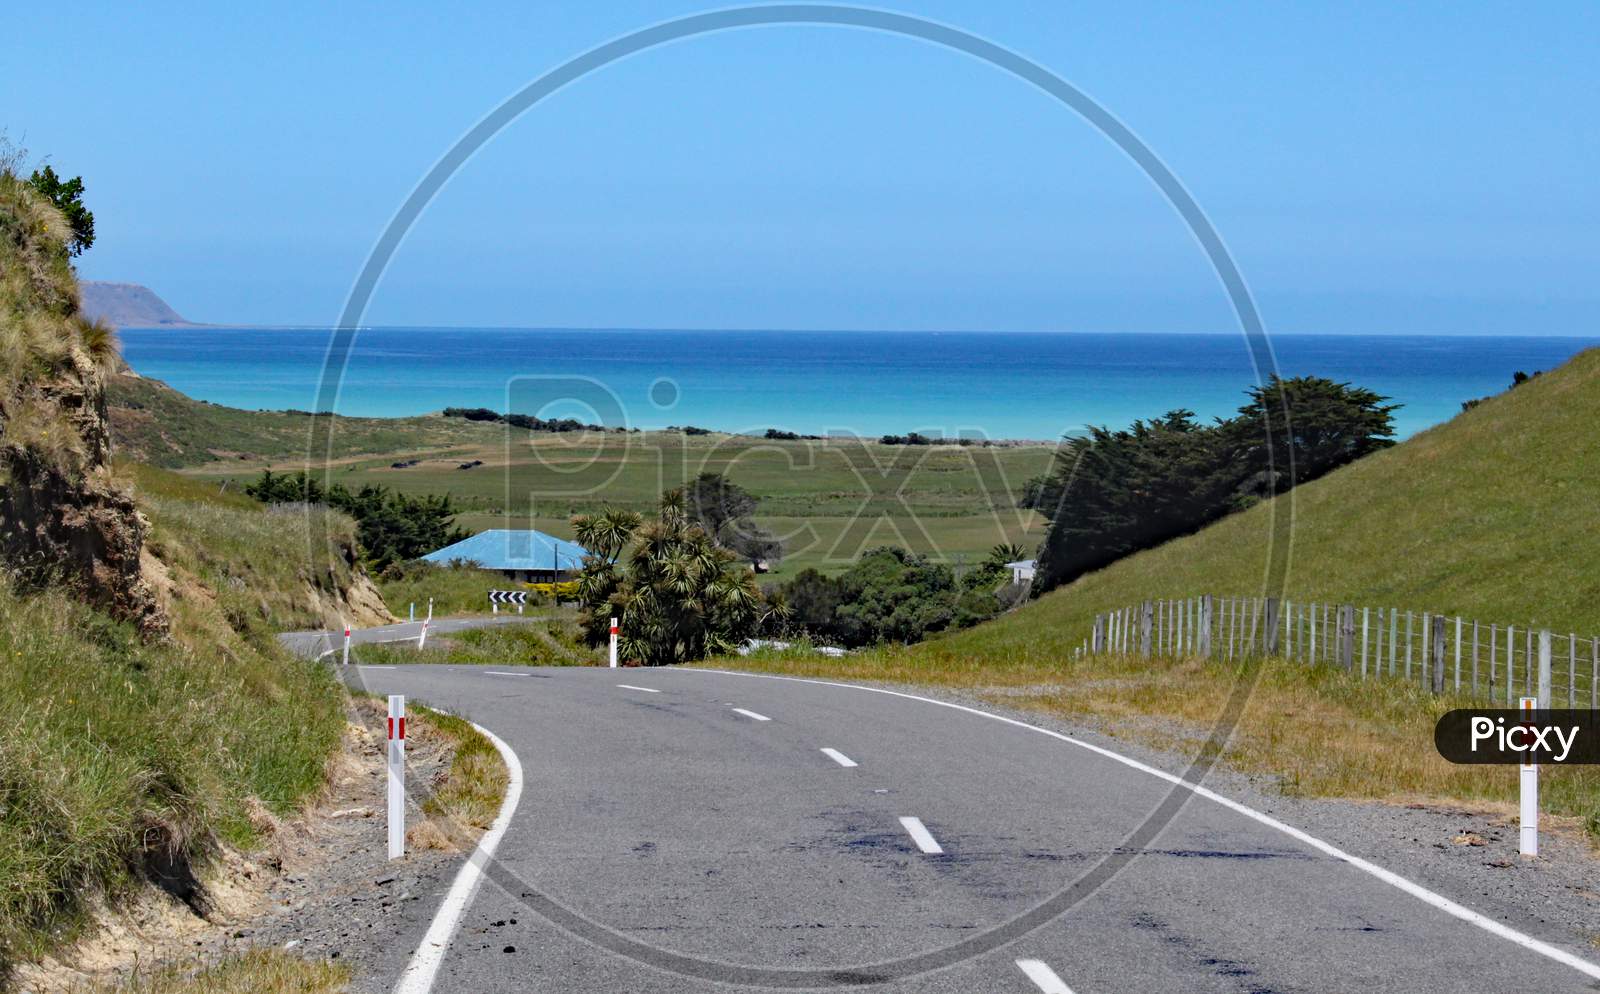 Winding Road Leads Down To The Sea In New Zealand.